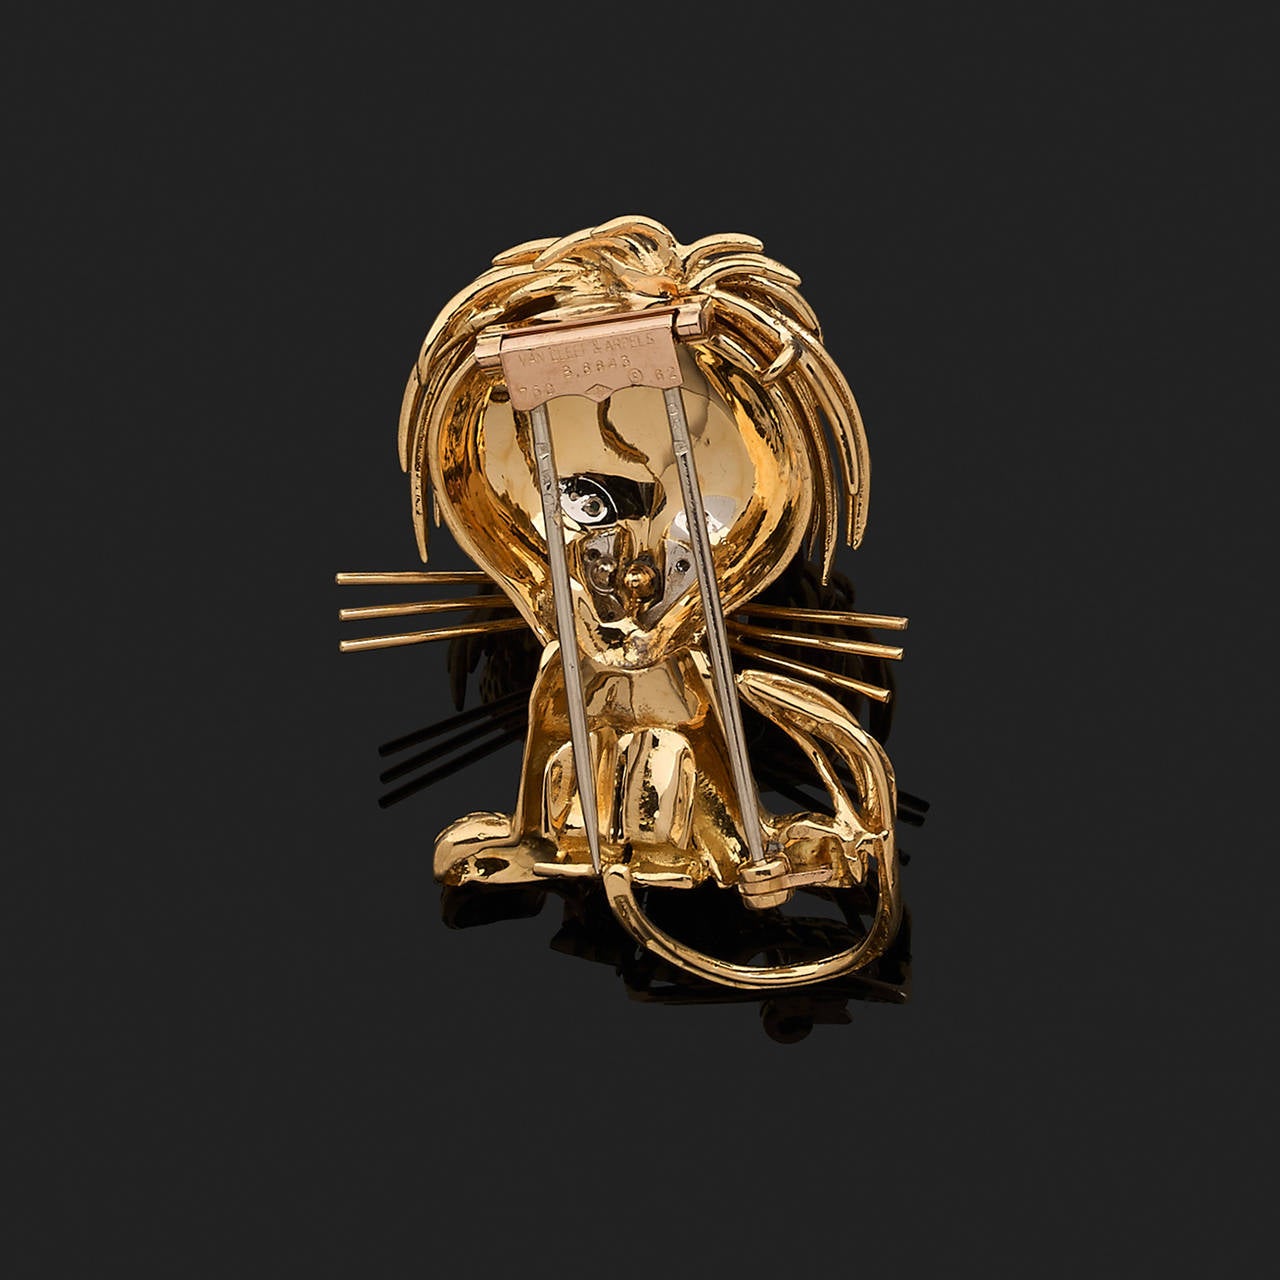 A diamond, emeralds, black enamel and 18k gold brooch stylizing a lion. Signed Van Cleef & Arpels and numbered B8843.